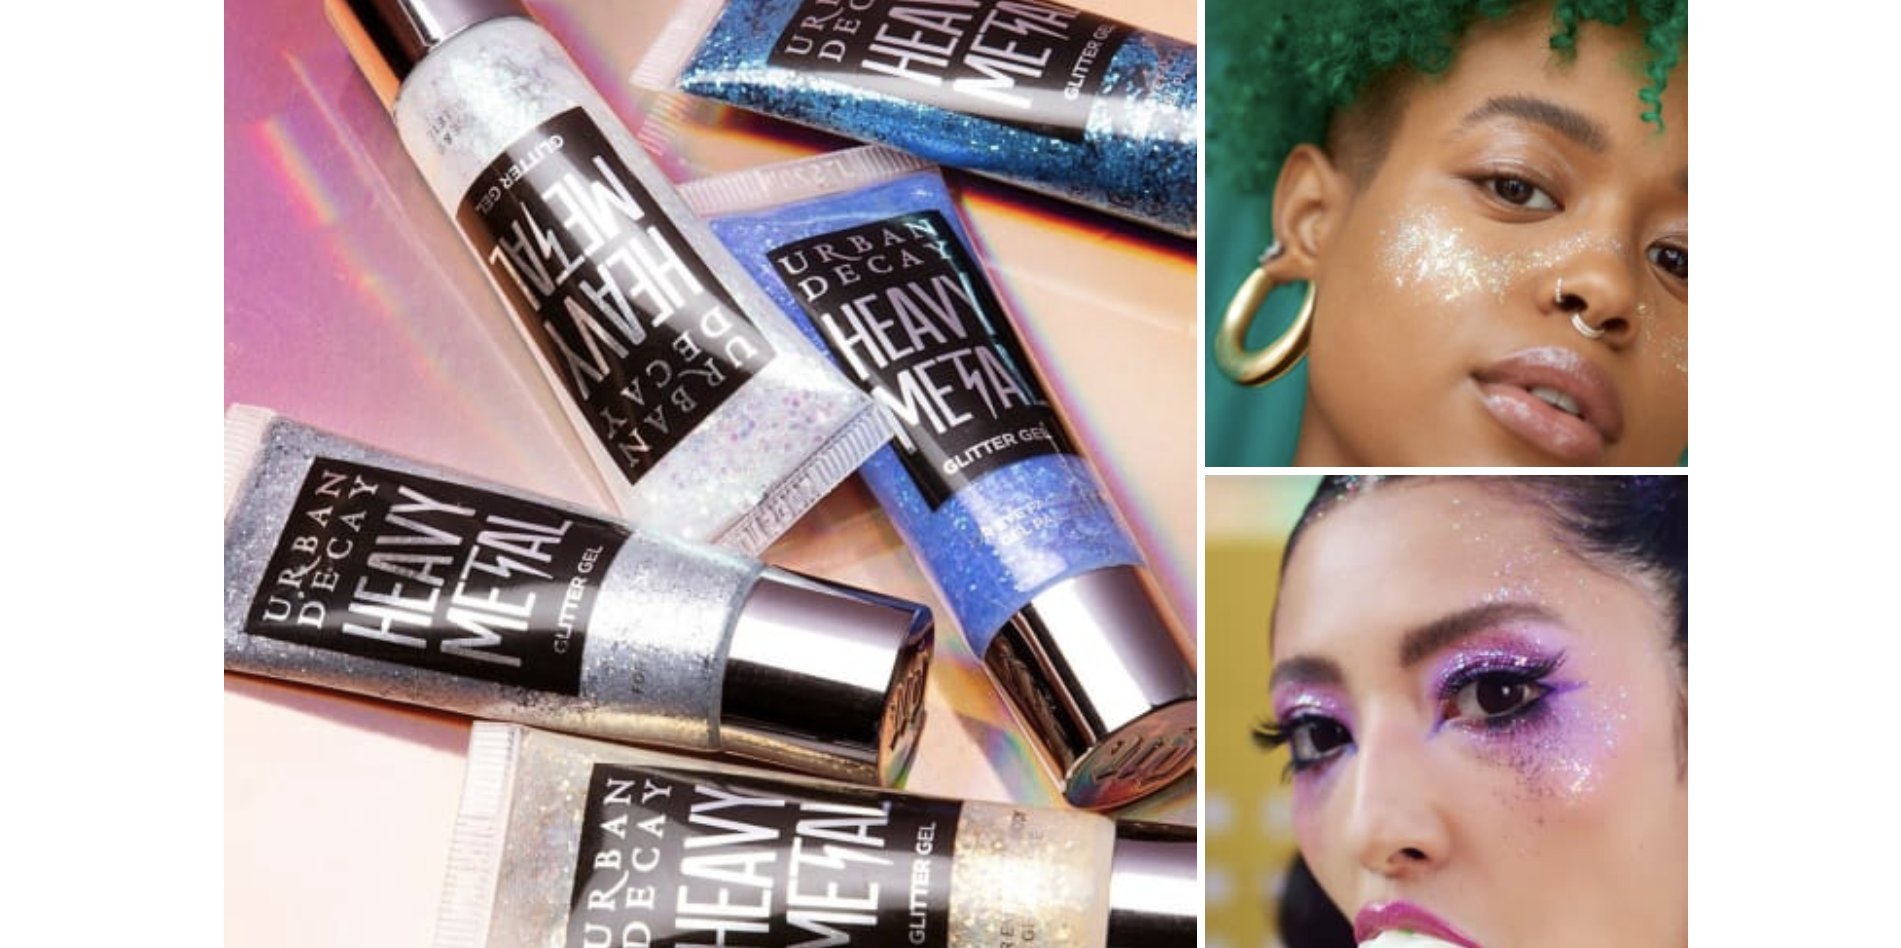 screen shot 2019 07 01 at 2 35 42 am e1561916275235.png?resize=412,232 - 23 Beauty Products That Will Freshen Up Your Look And Day